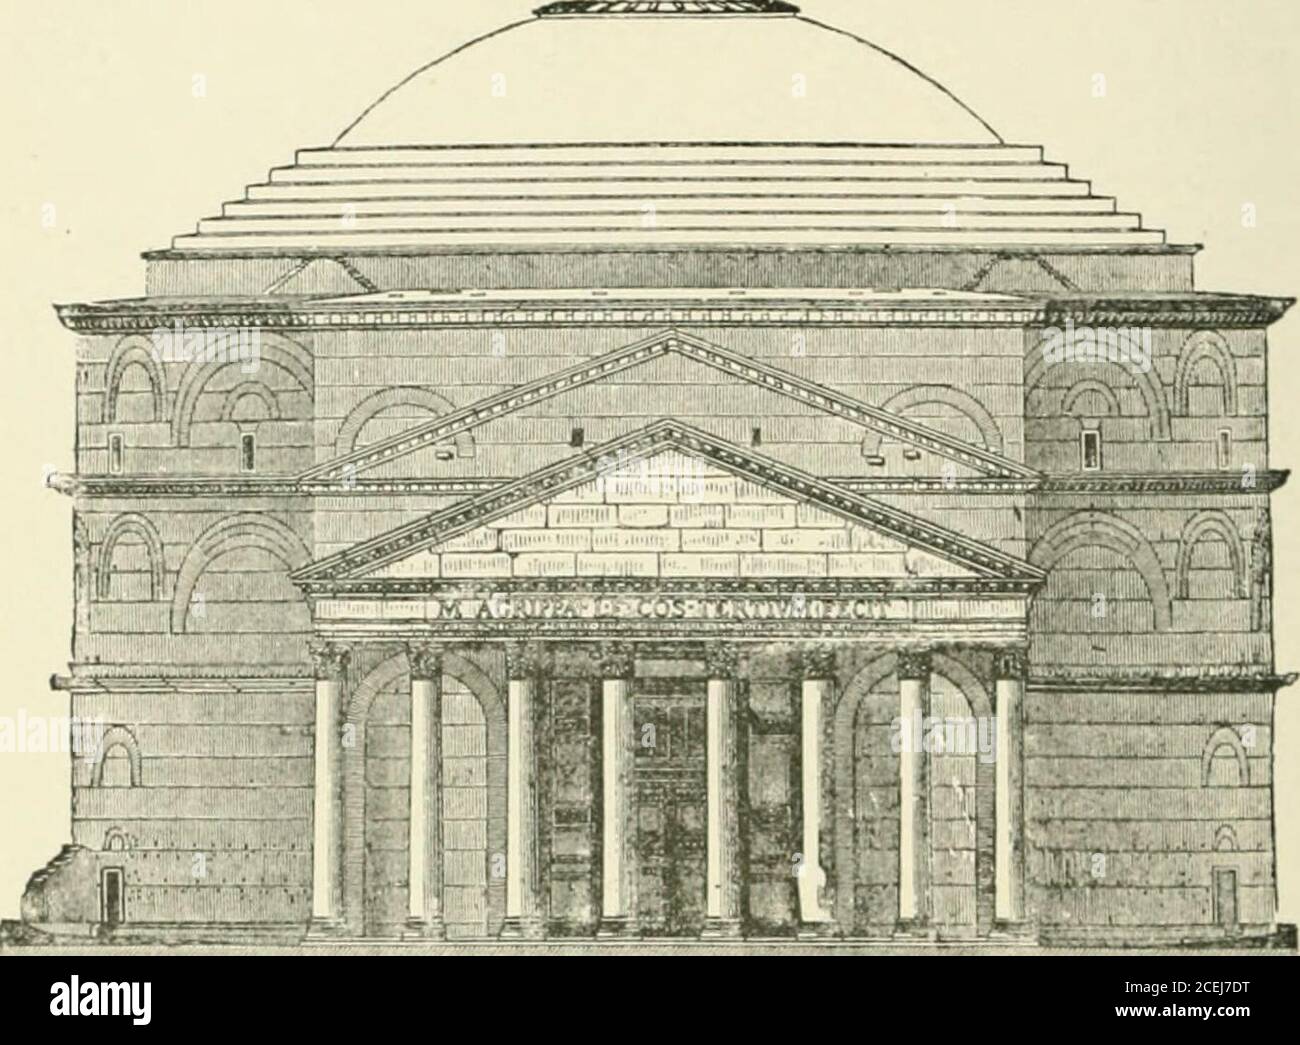 . The story of architecture: an outline of the styles in all countries. les were scattered over south-ern Europe, western Asia, and northern Africa ; andthe ruins of many splendid specimens still exist atBaalbec, Palmyra, Nimes, Athens, and other foreigncities that came under the Roman yoke. The temples in the city of Rome, however, aresufficiently typical to illustrate the beauties and pe-culiarities of all, and so we will confine our discussionand description to the examples in the Eternal Cityalone. Nearly all these temples resembled those of Greecein consisting of a vestibule and cclla rai Stock Photo